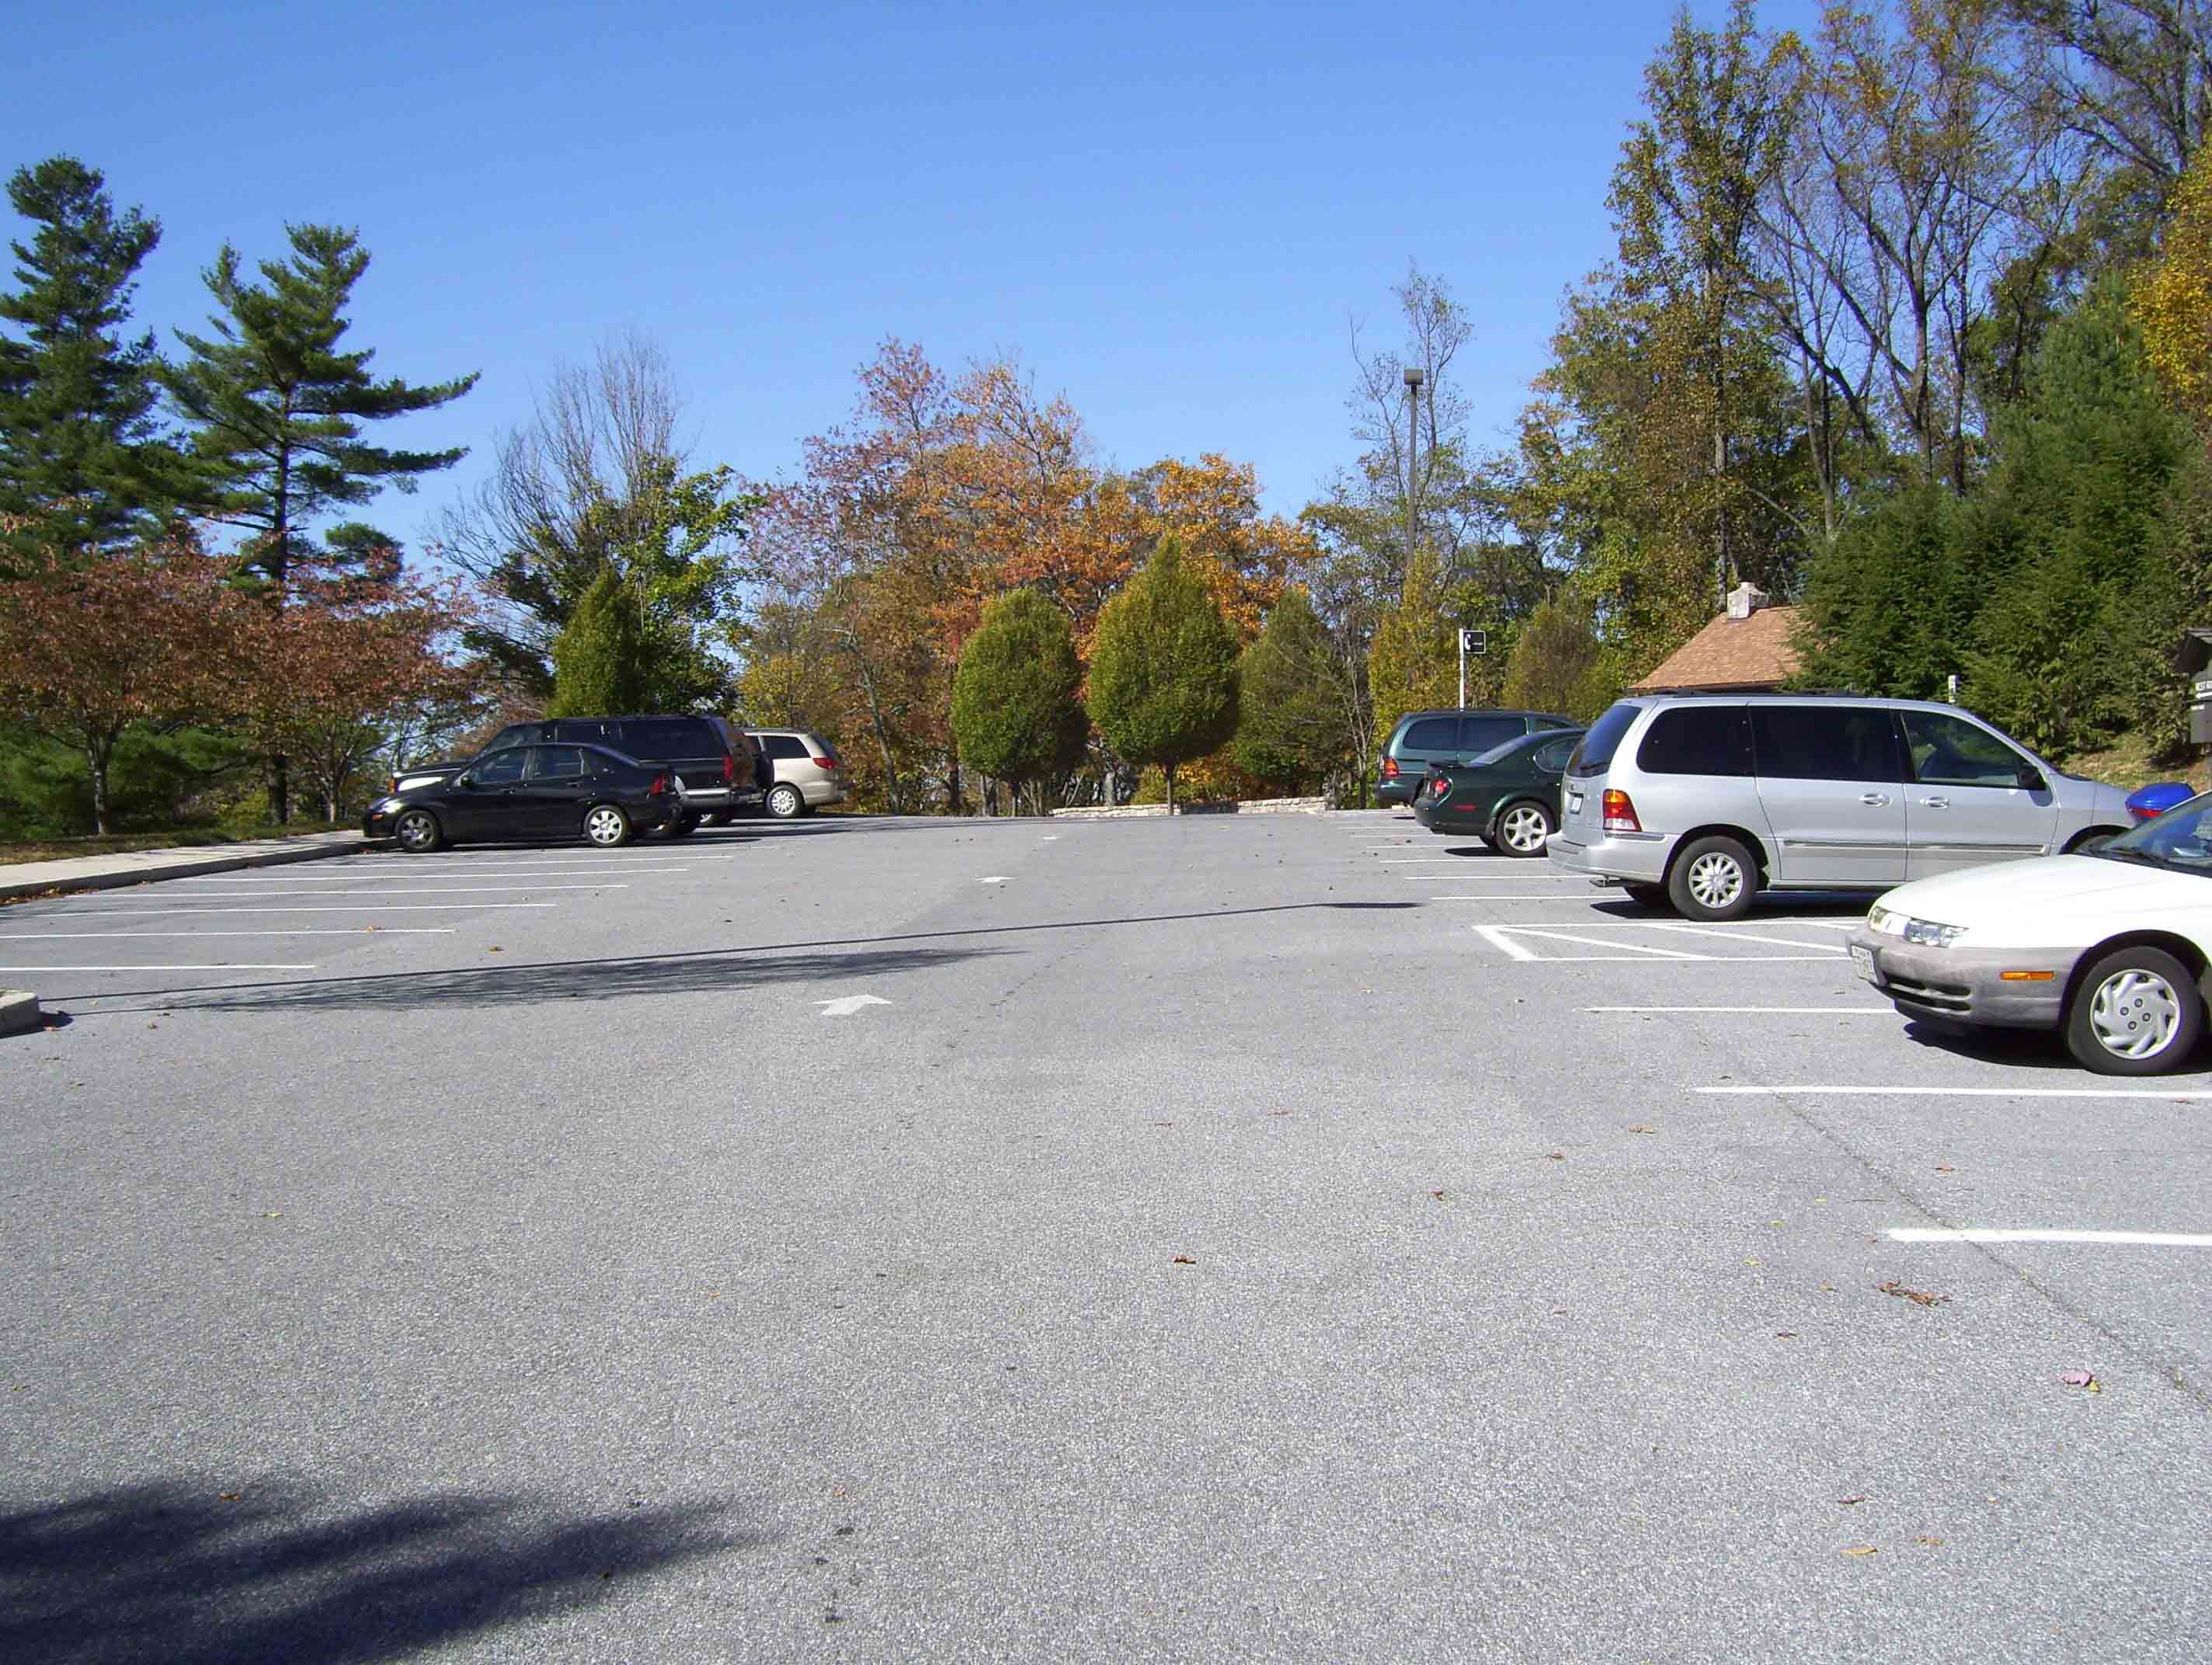 mm 3.1 - Upper parking area for Washington Monument. There is more parking in picnic areas a short distance downhill.  Courtesy dlcul@conncoll.edu